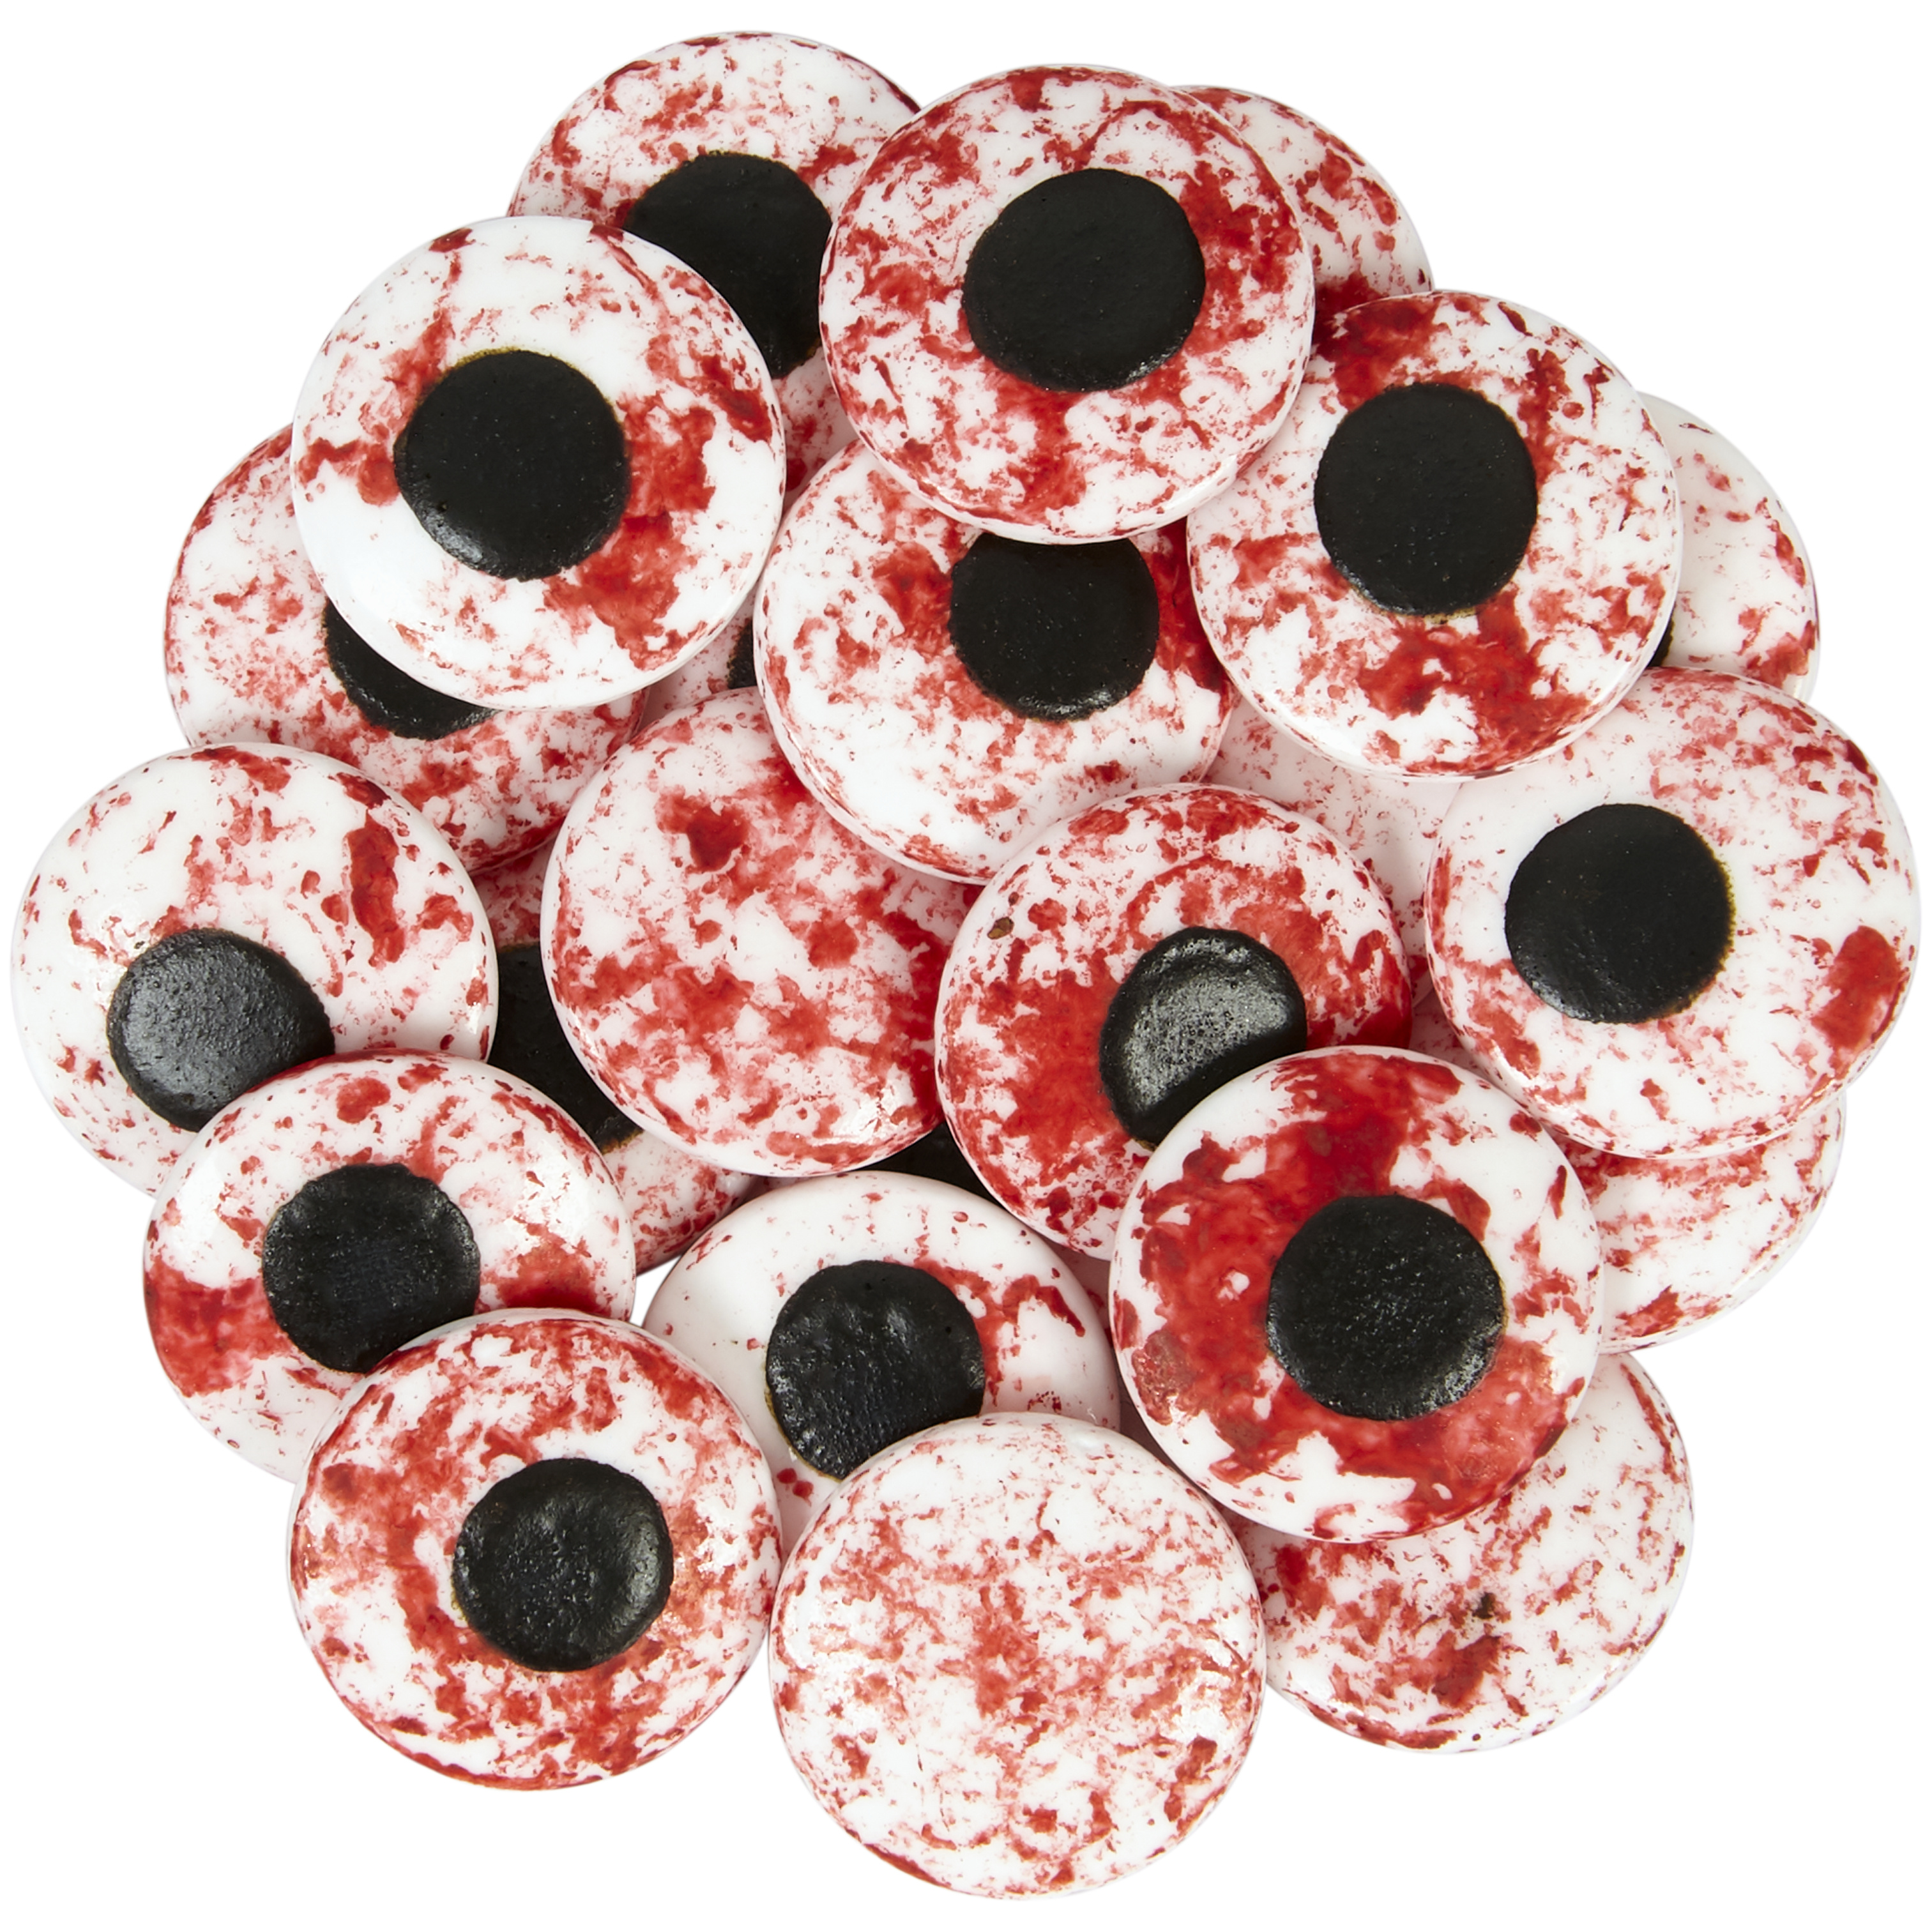 Wilton Red Vein Candy Eyeballs, Edible Candies for Icing